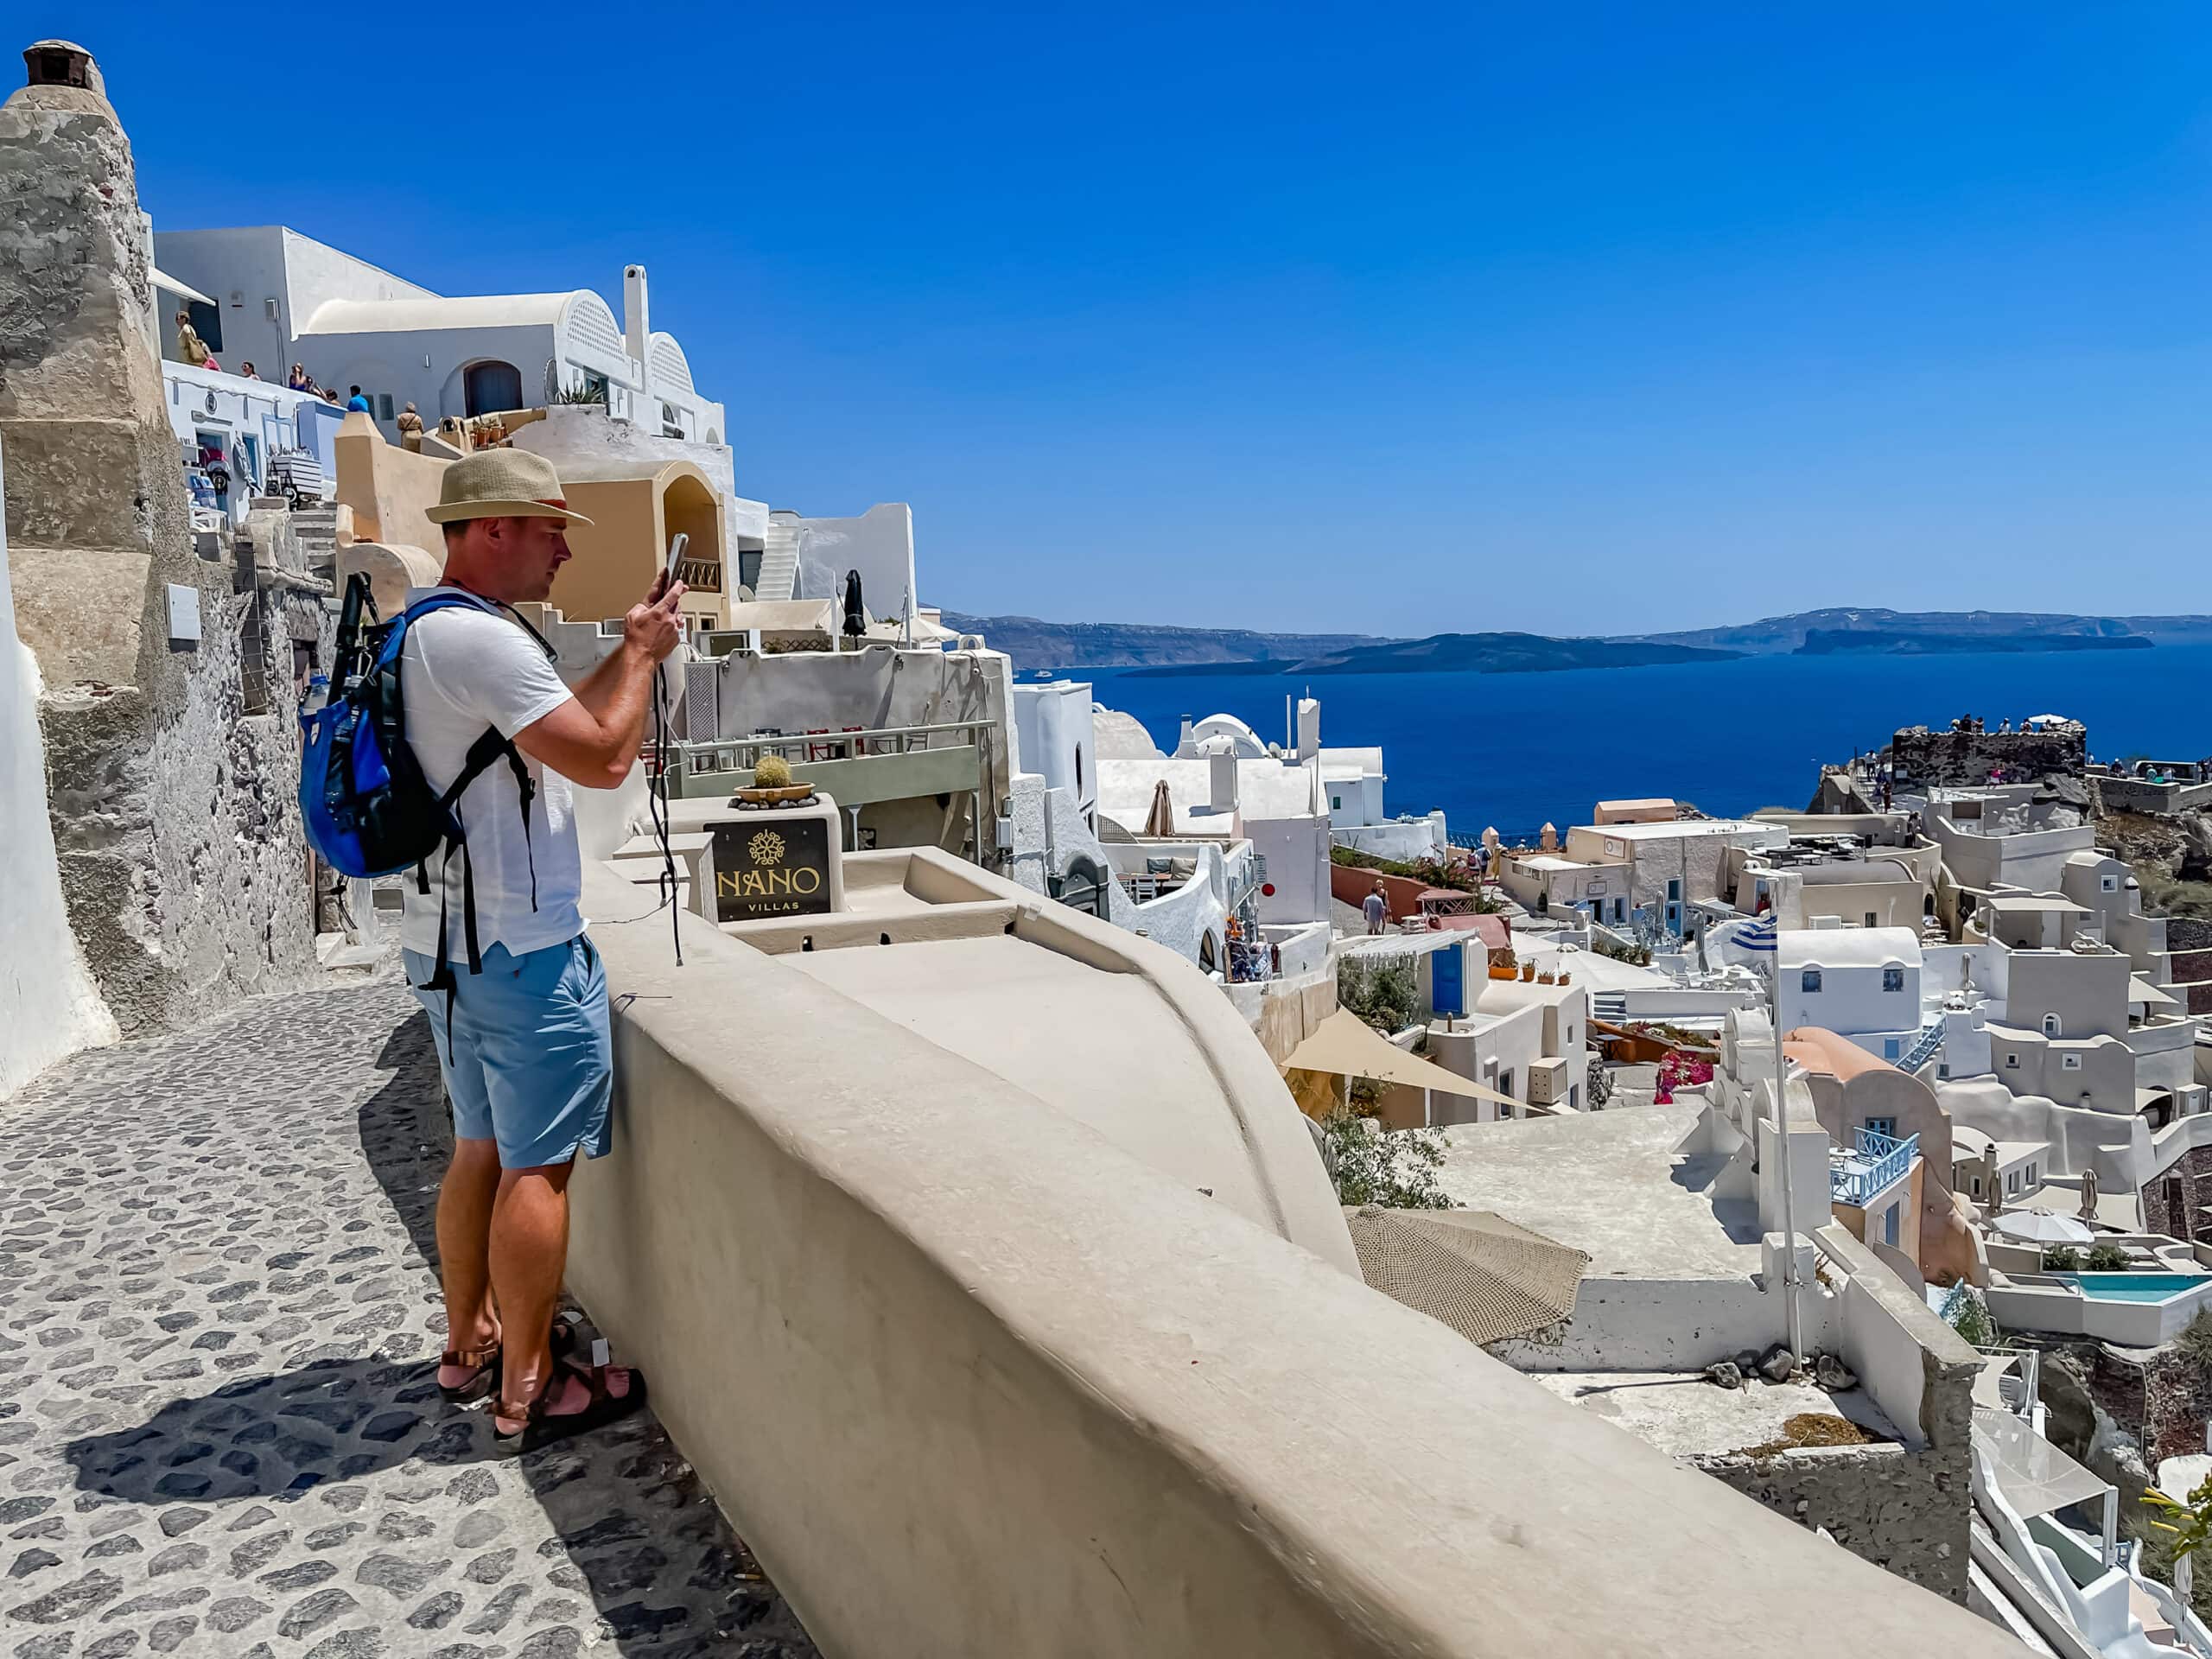 8 Tips for planning the best Greece and Greek Islands vacation